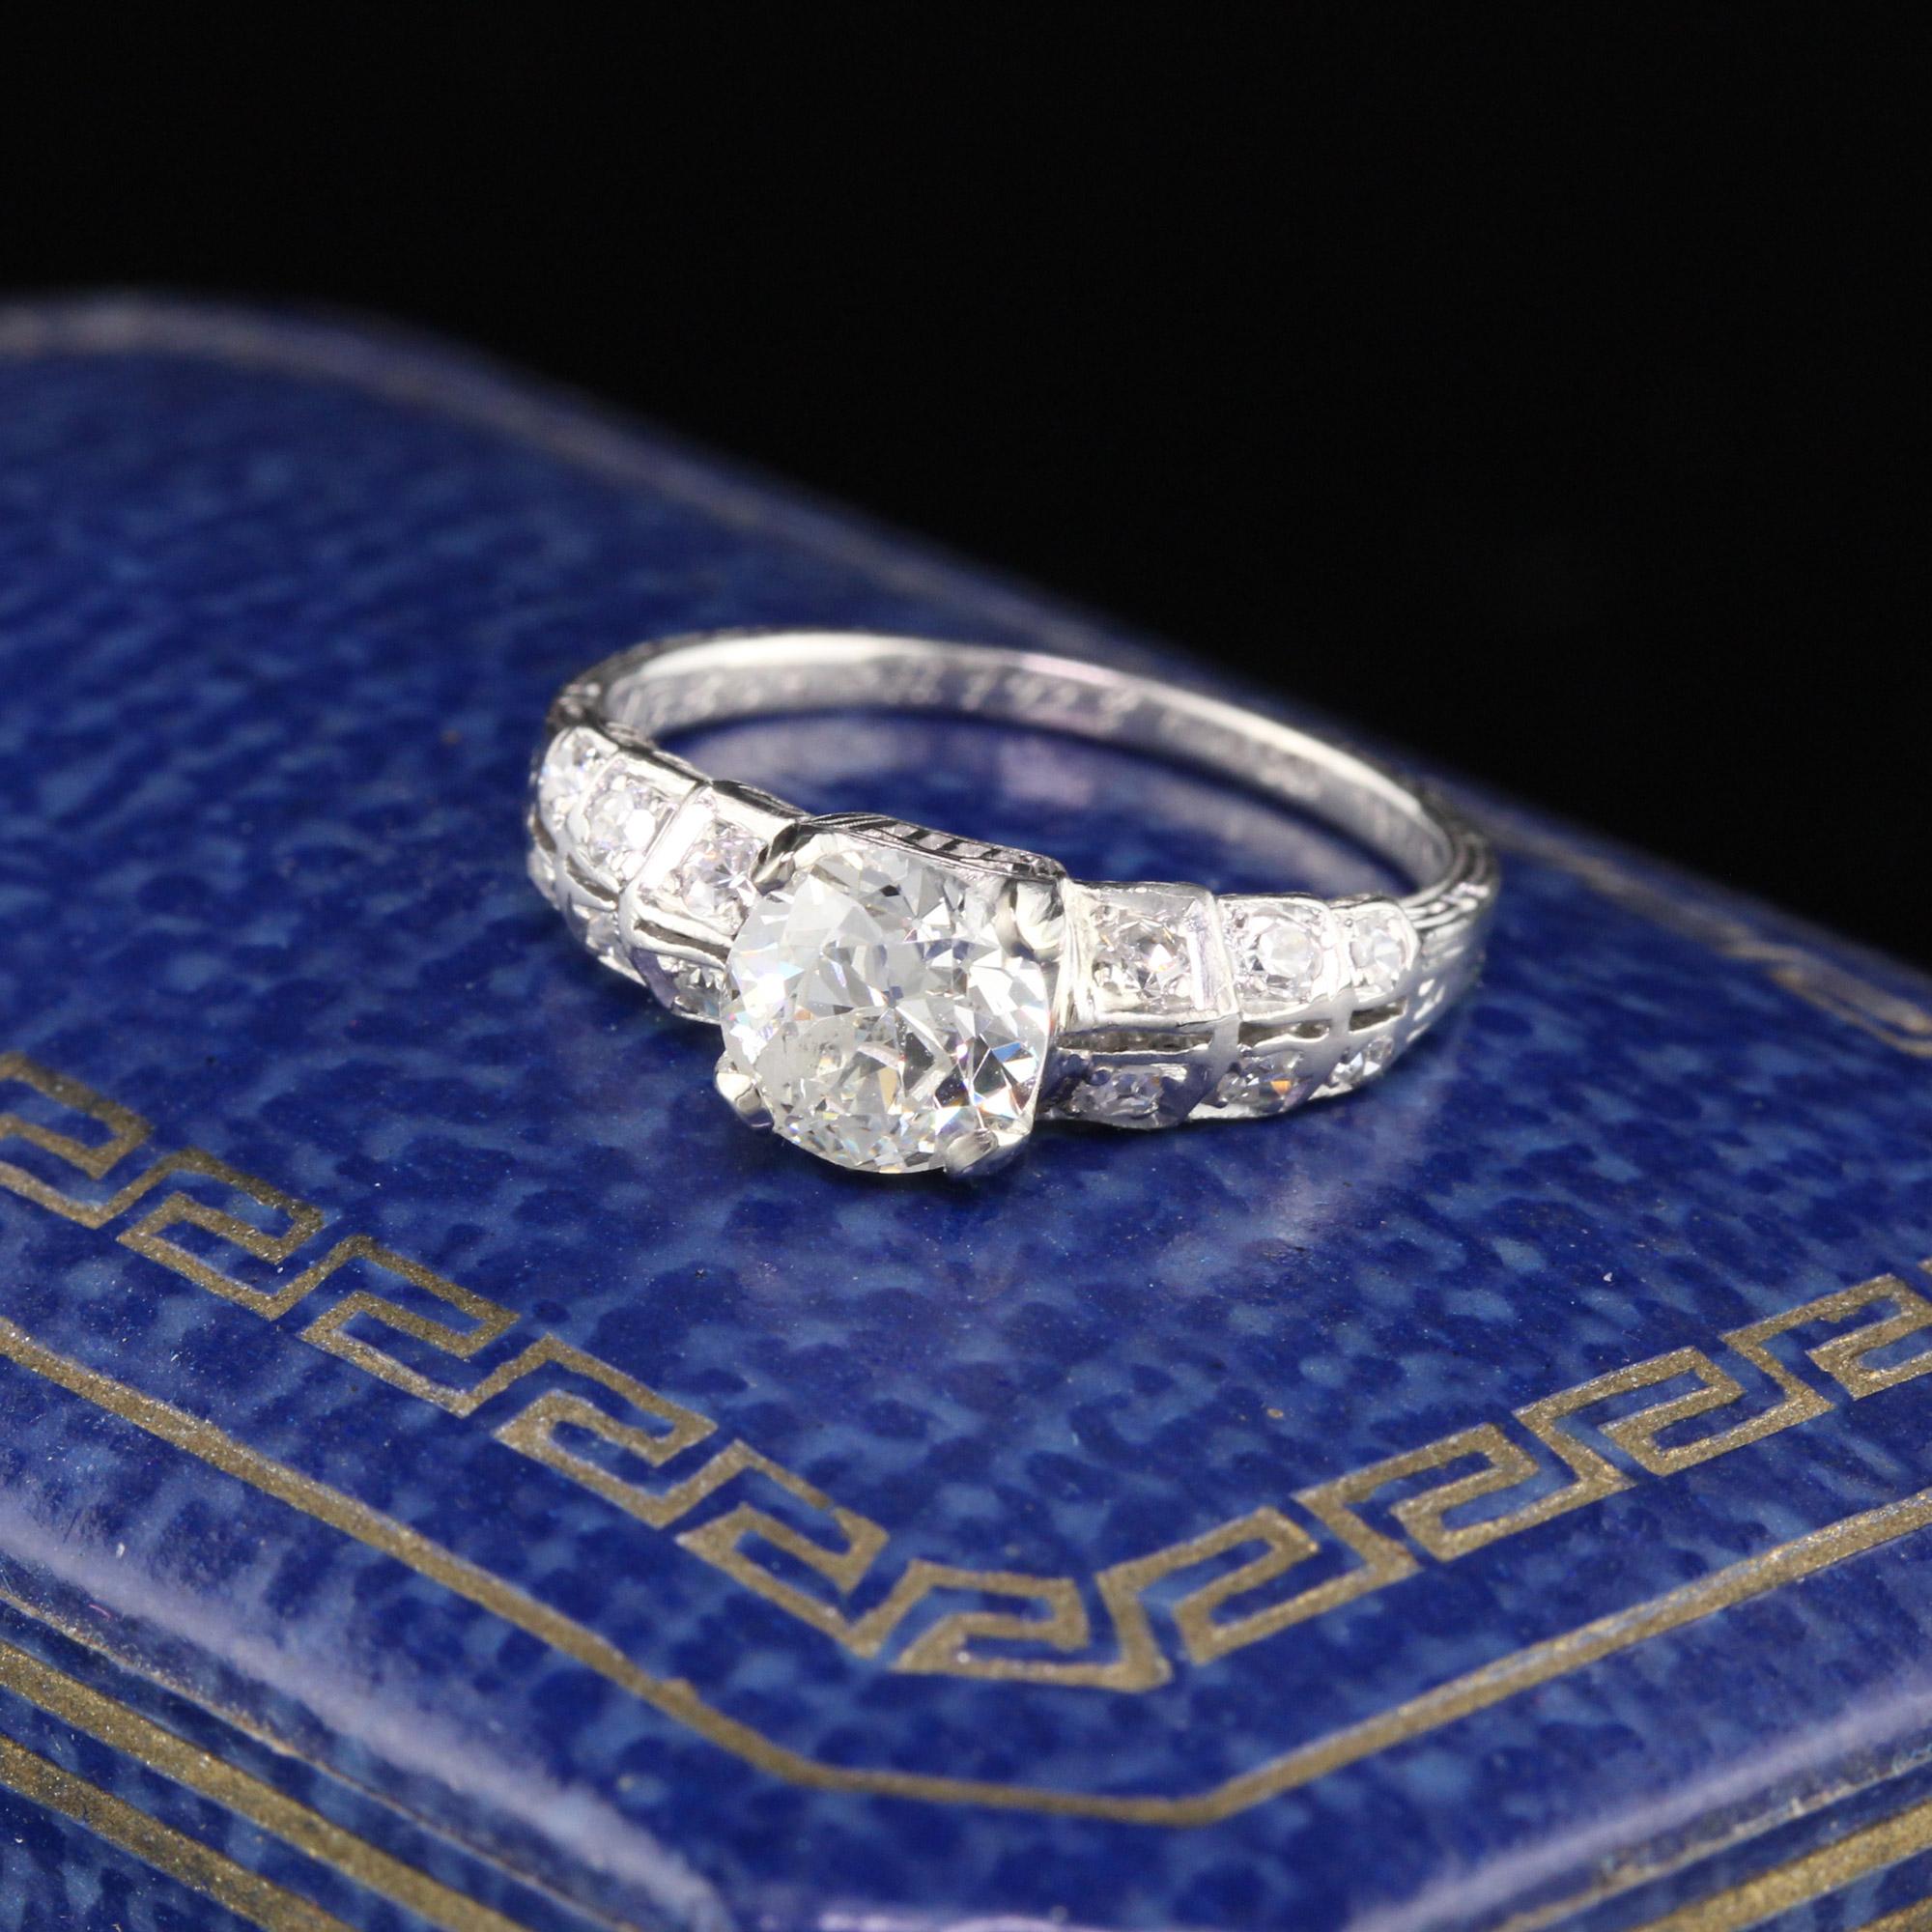 Stunning, simple, classic art deco engagement ring in platinum with a asscher cut diamond center, and 3 old cut round diamonds on either side of the shank.

#R0185

Metal: Platinum

Weight: 2.7 Grams

Center Diamond Weight: 0.77 ct old european cut